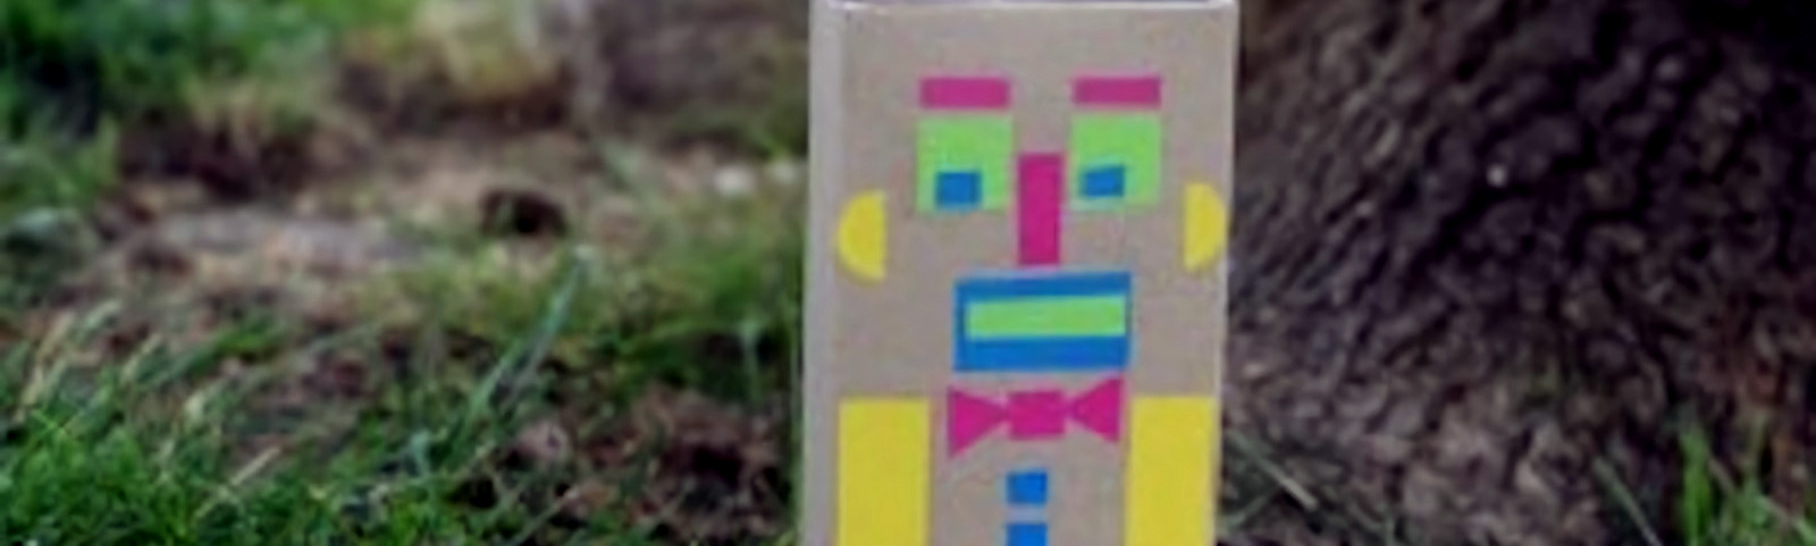 a robot made out of different colored shapes